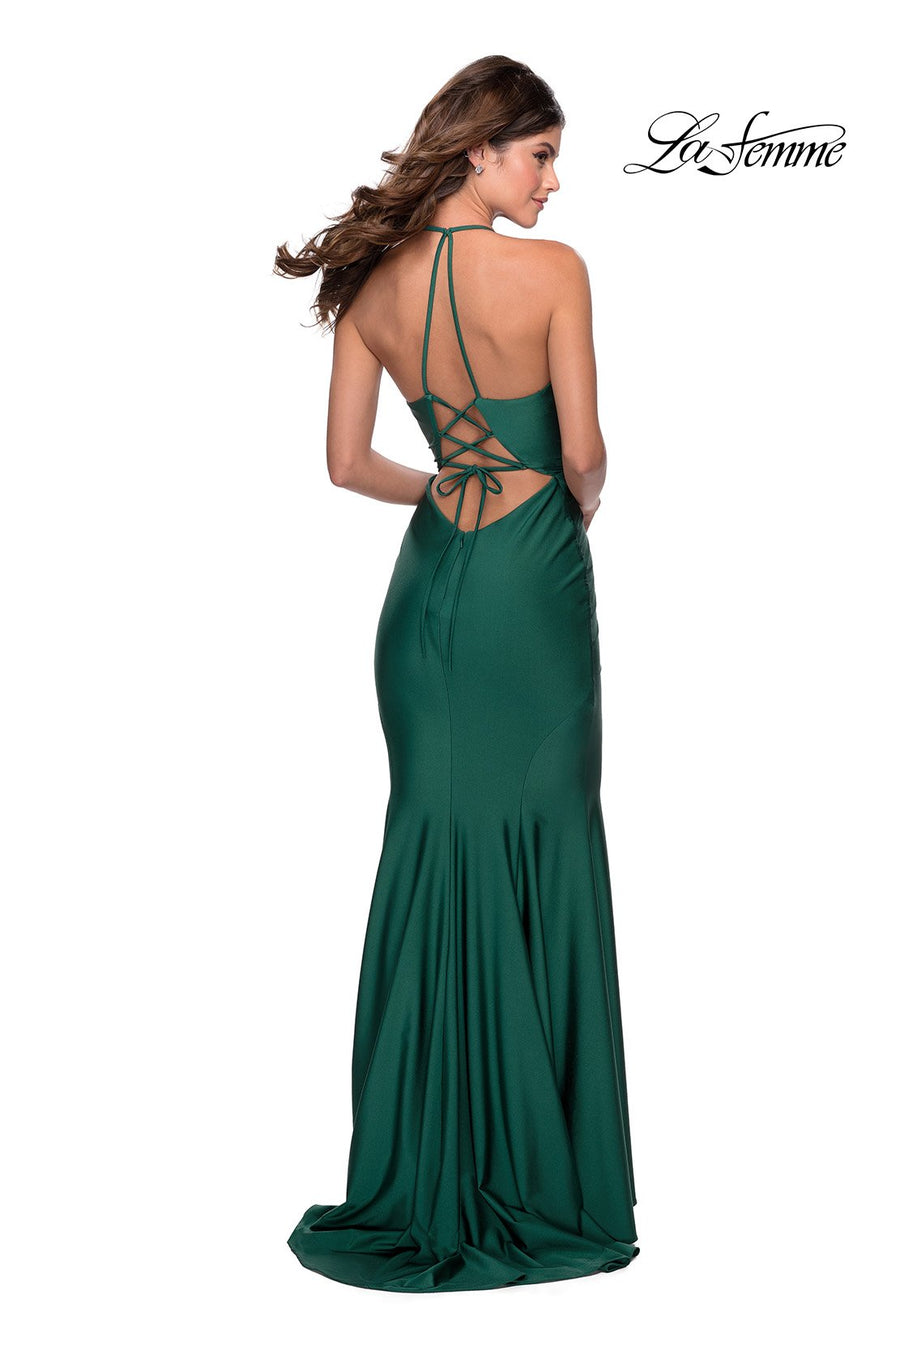 La Femme 28552 prom dress images.  La Femme 28552 is available in these colors: Black, Burgundy, Emerald.